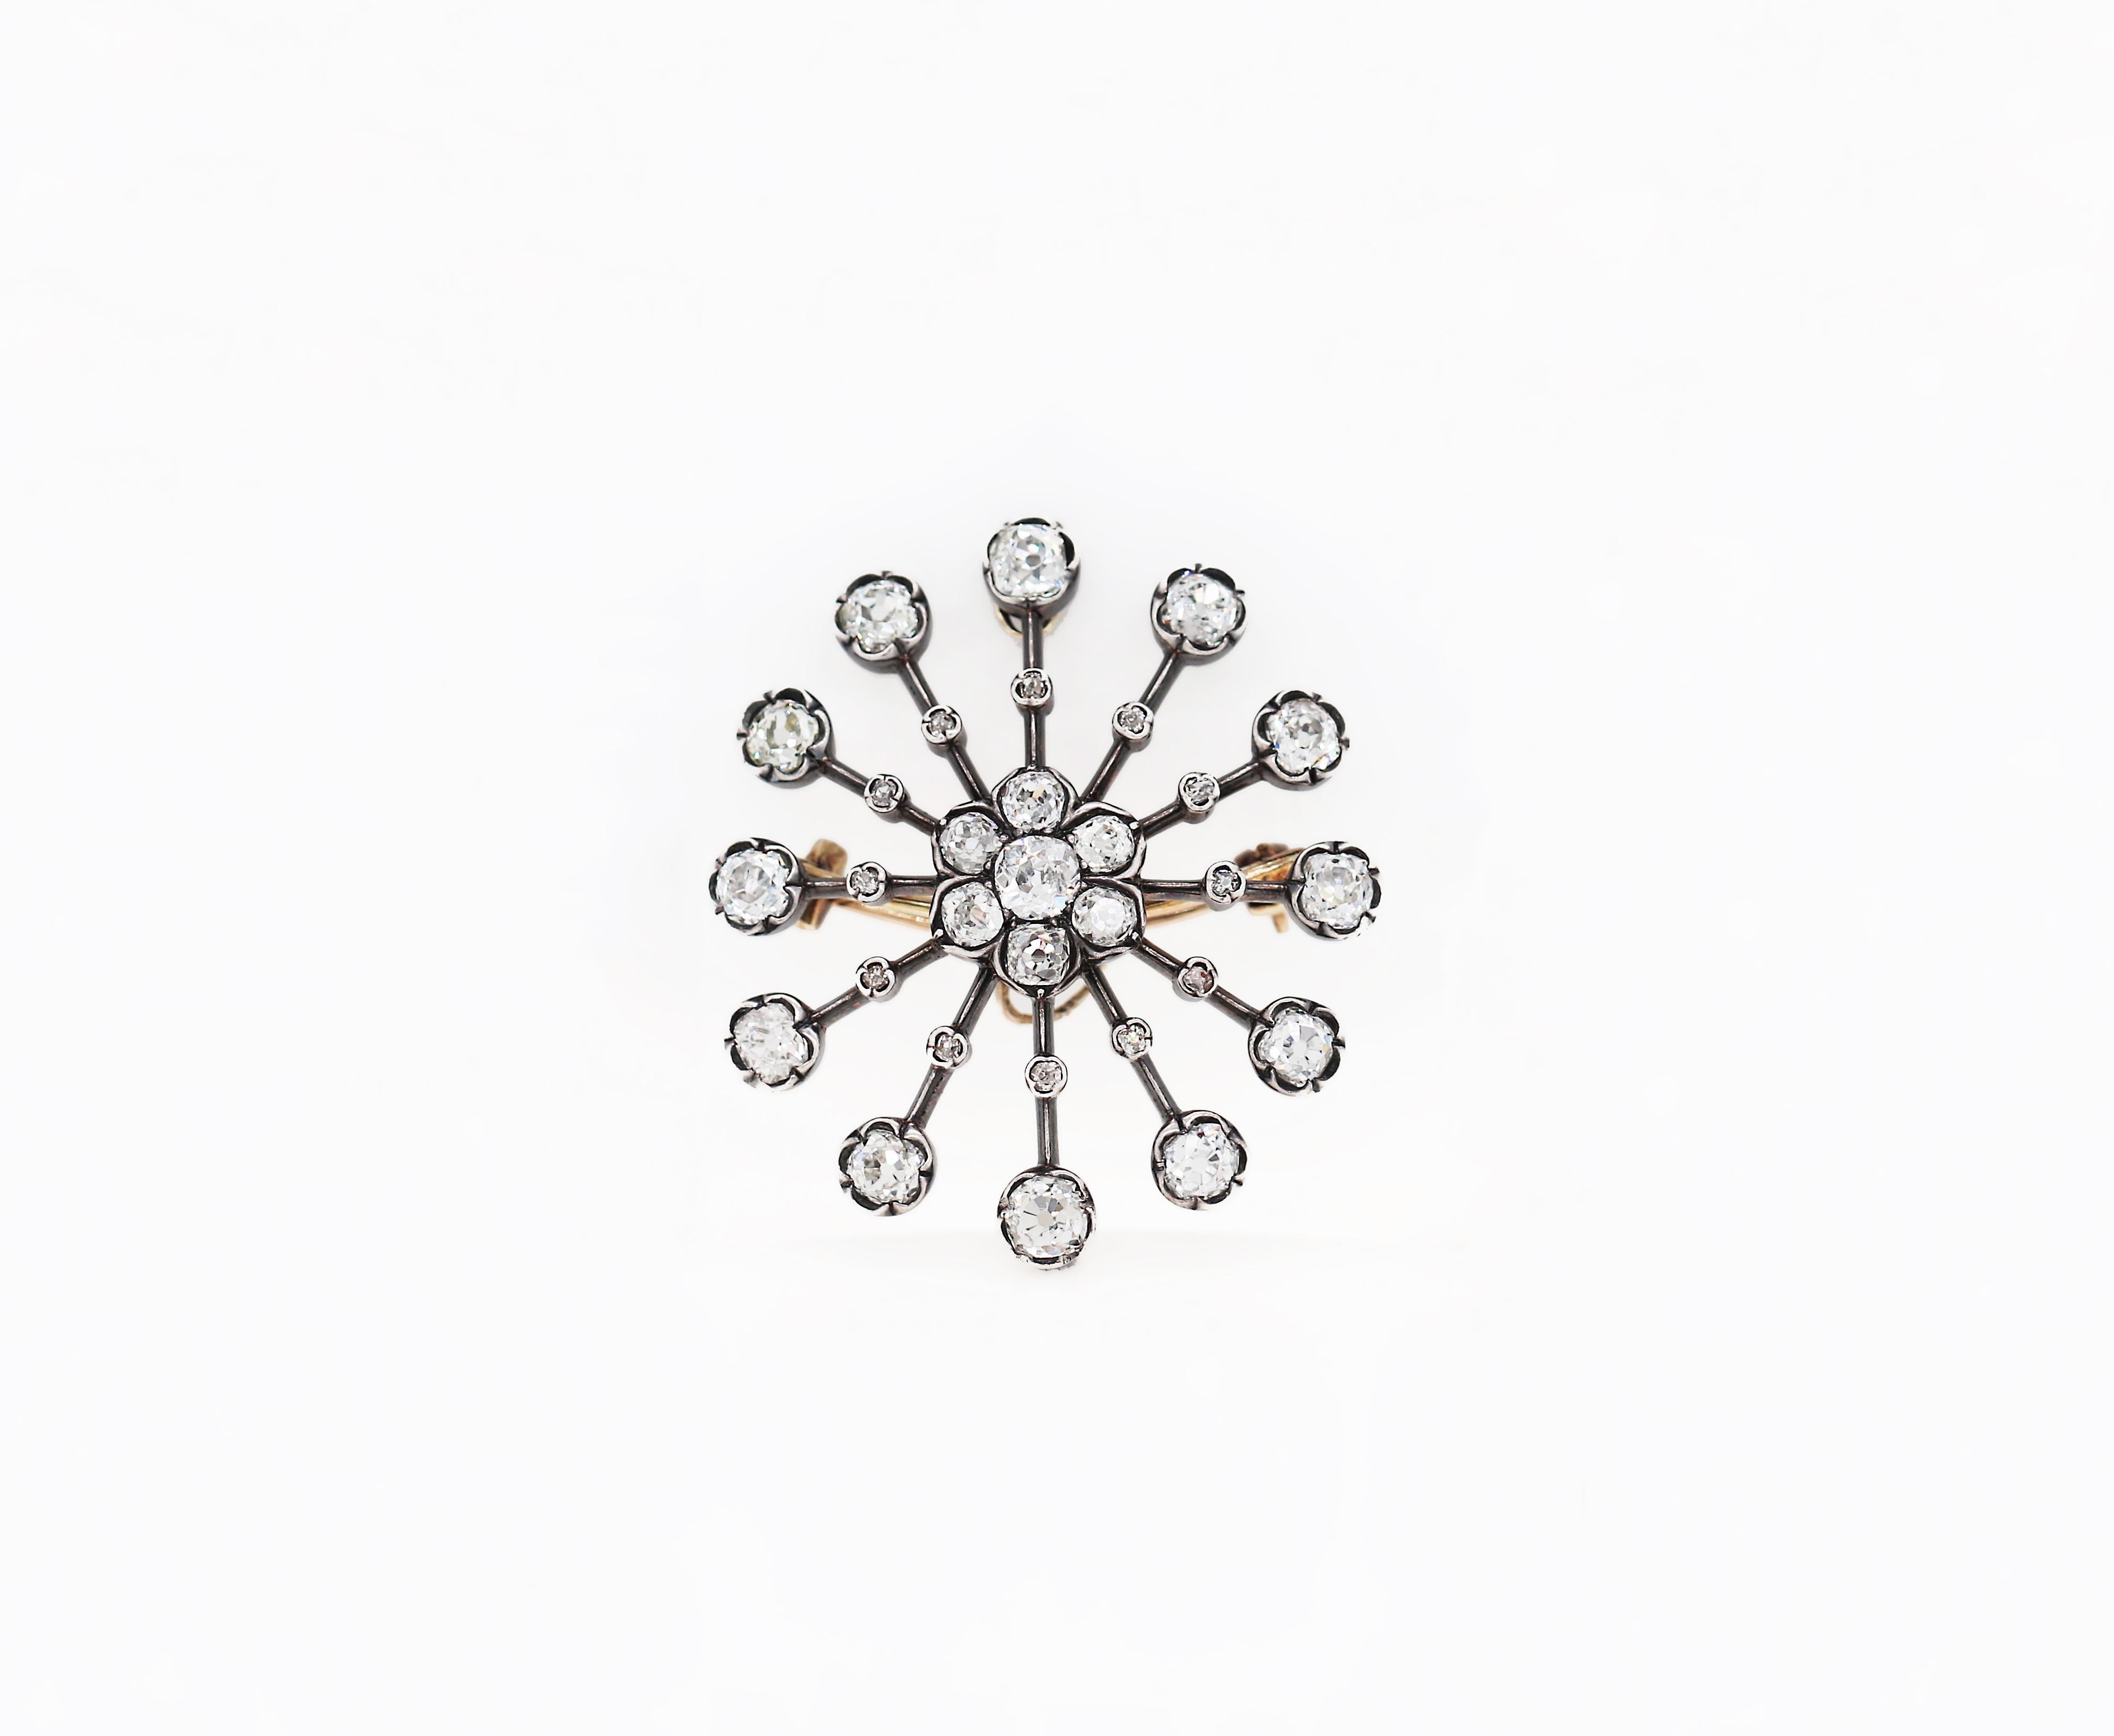 Beautiful antique flower brooch/pendant featuring 31 old mine cut diamonds with a total approximate weight of 5.50ct all rubver set in silver on gold. The piece is fitted with a handmade pin safety catch as well as a jump ring lever attachment to be